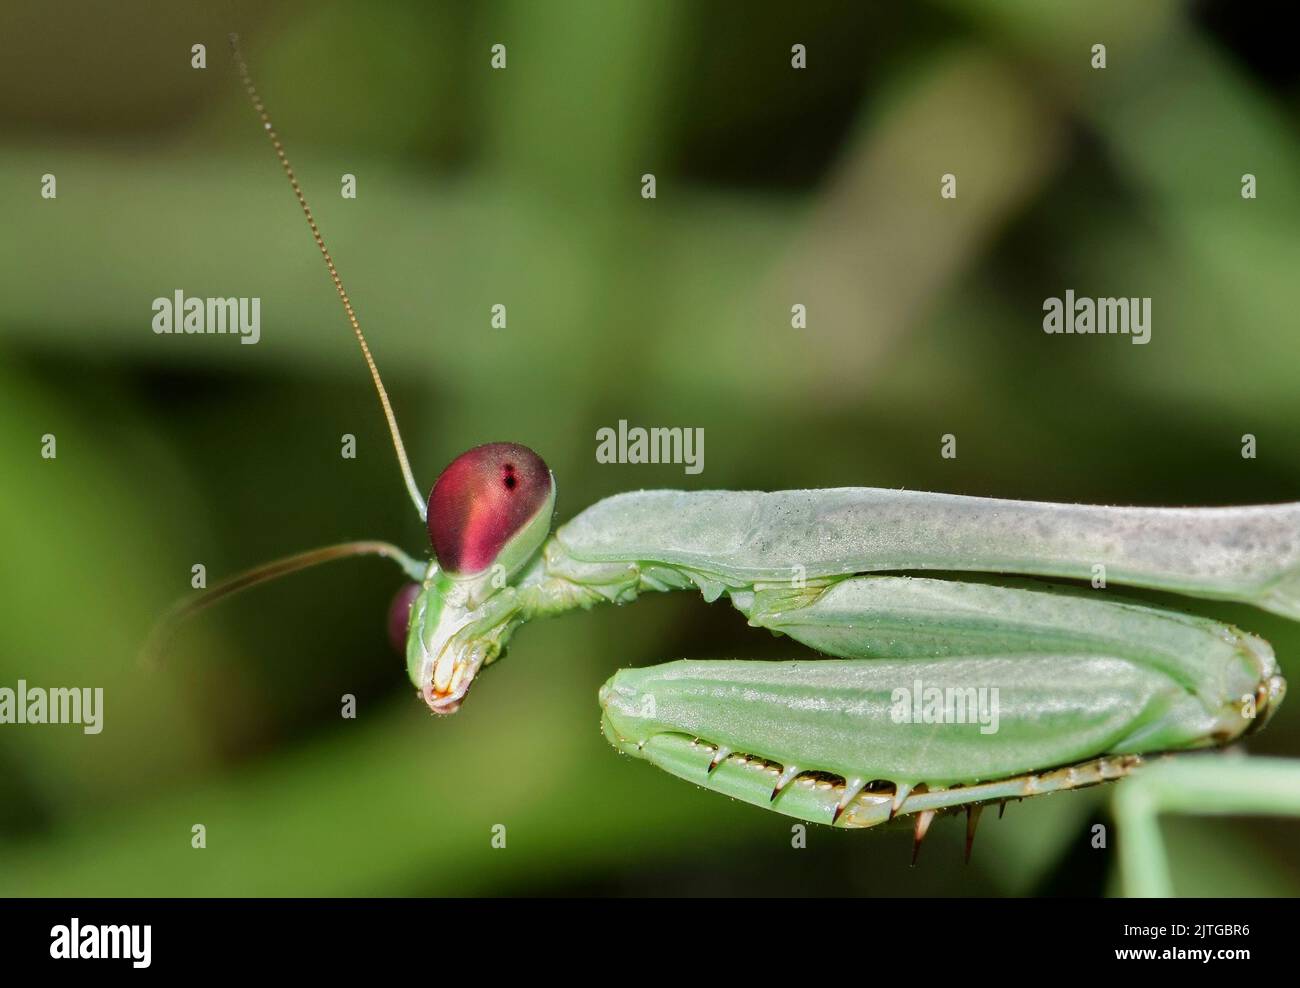 Green Praying Mantis profile displaying head, forelegs and prothorax, ventral view partial body. Stock Photo